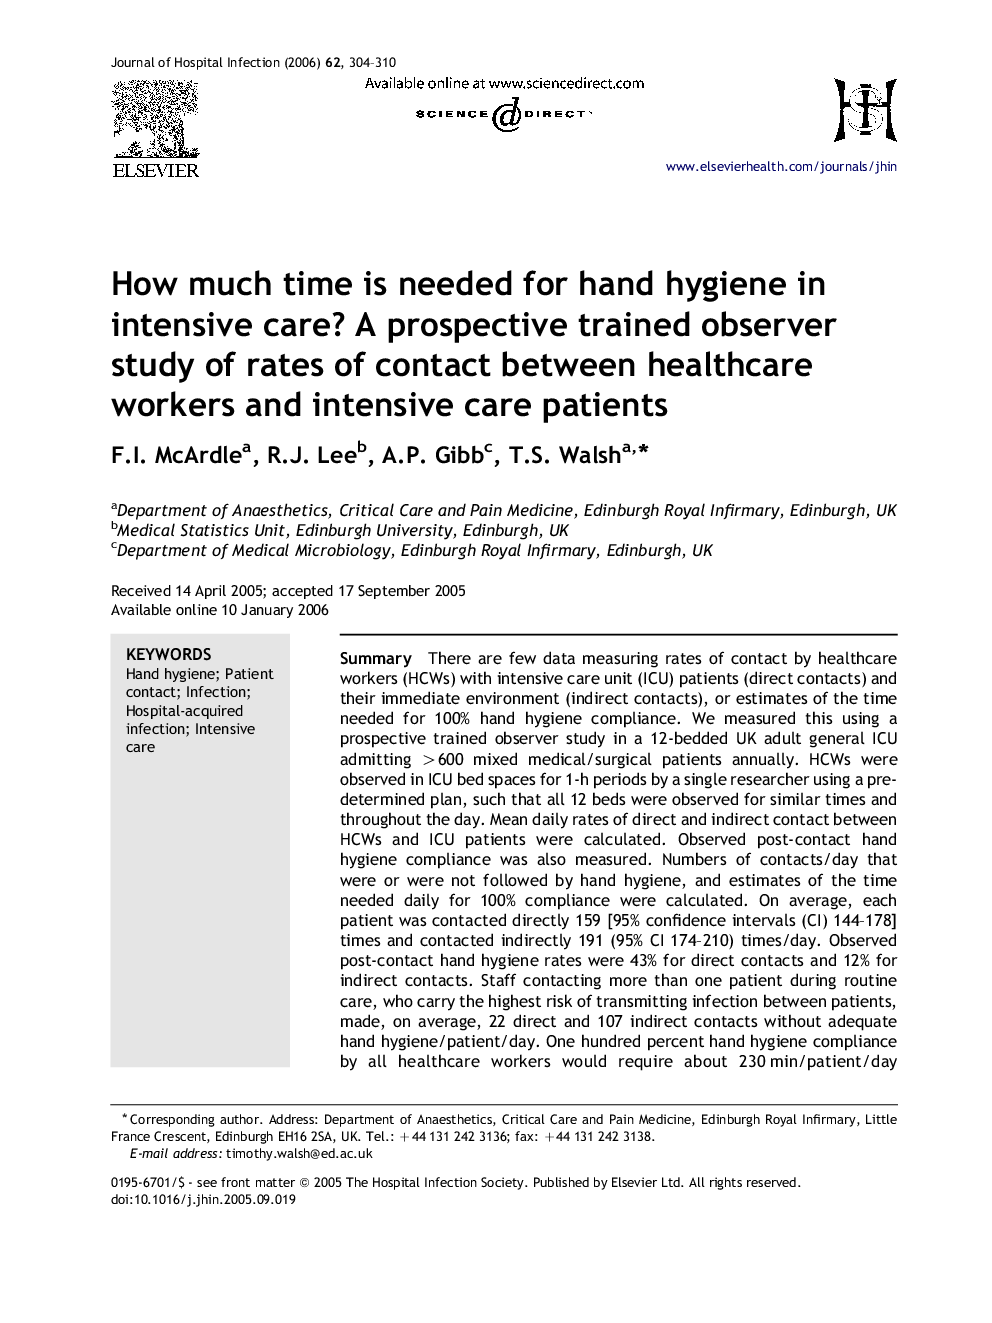 How much time is needed for hand hygiene in intensive care? A prospective trained observer study of rates of contact between healthcare workers and intensive care patients